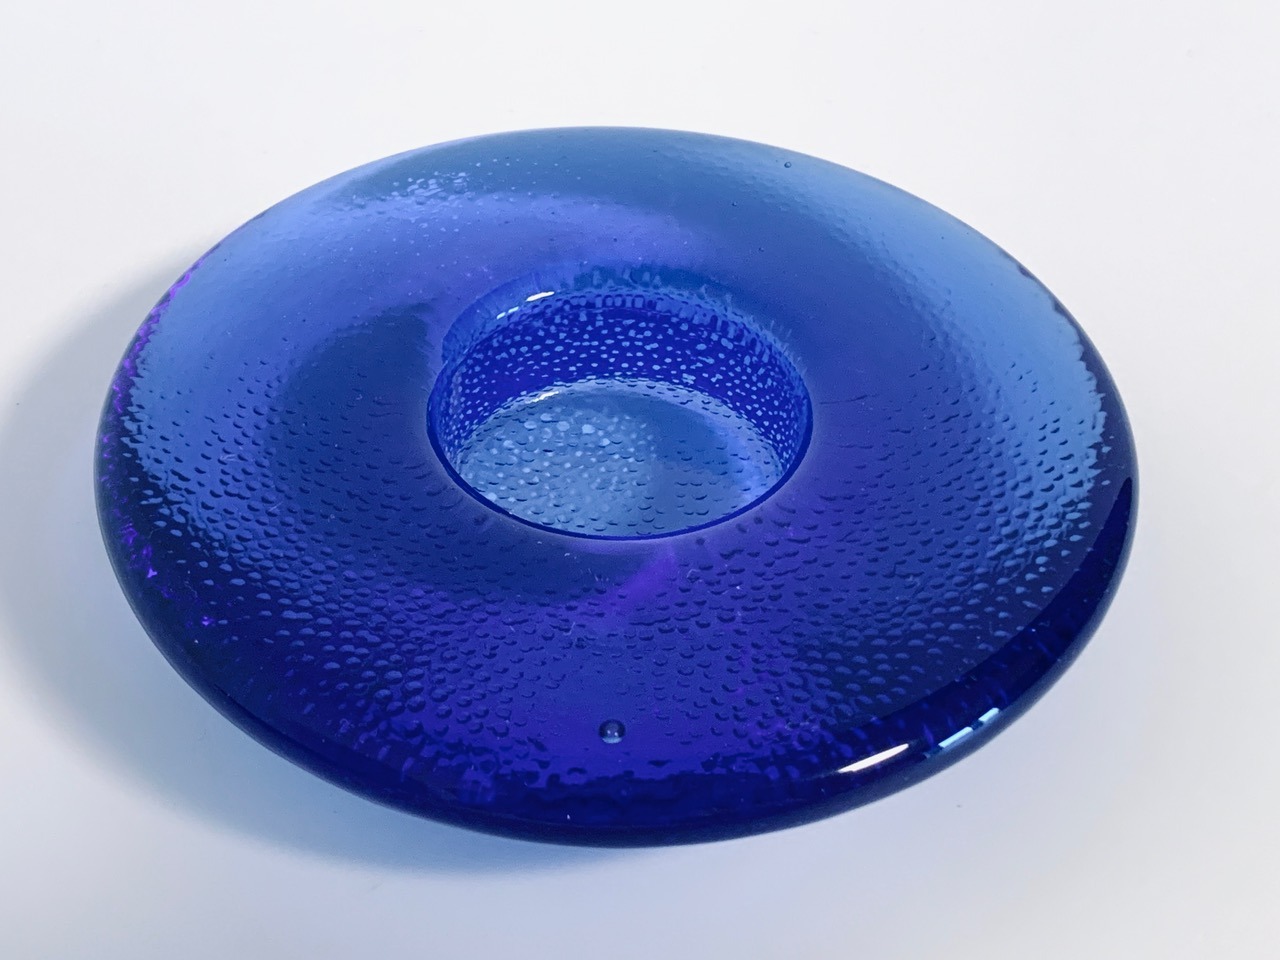 Image of the Iittala Nappi tea light holder cobalt blue offered in this advertisement.